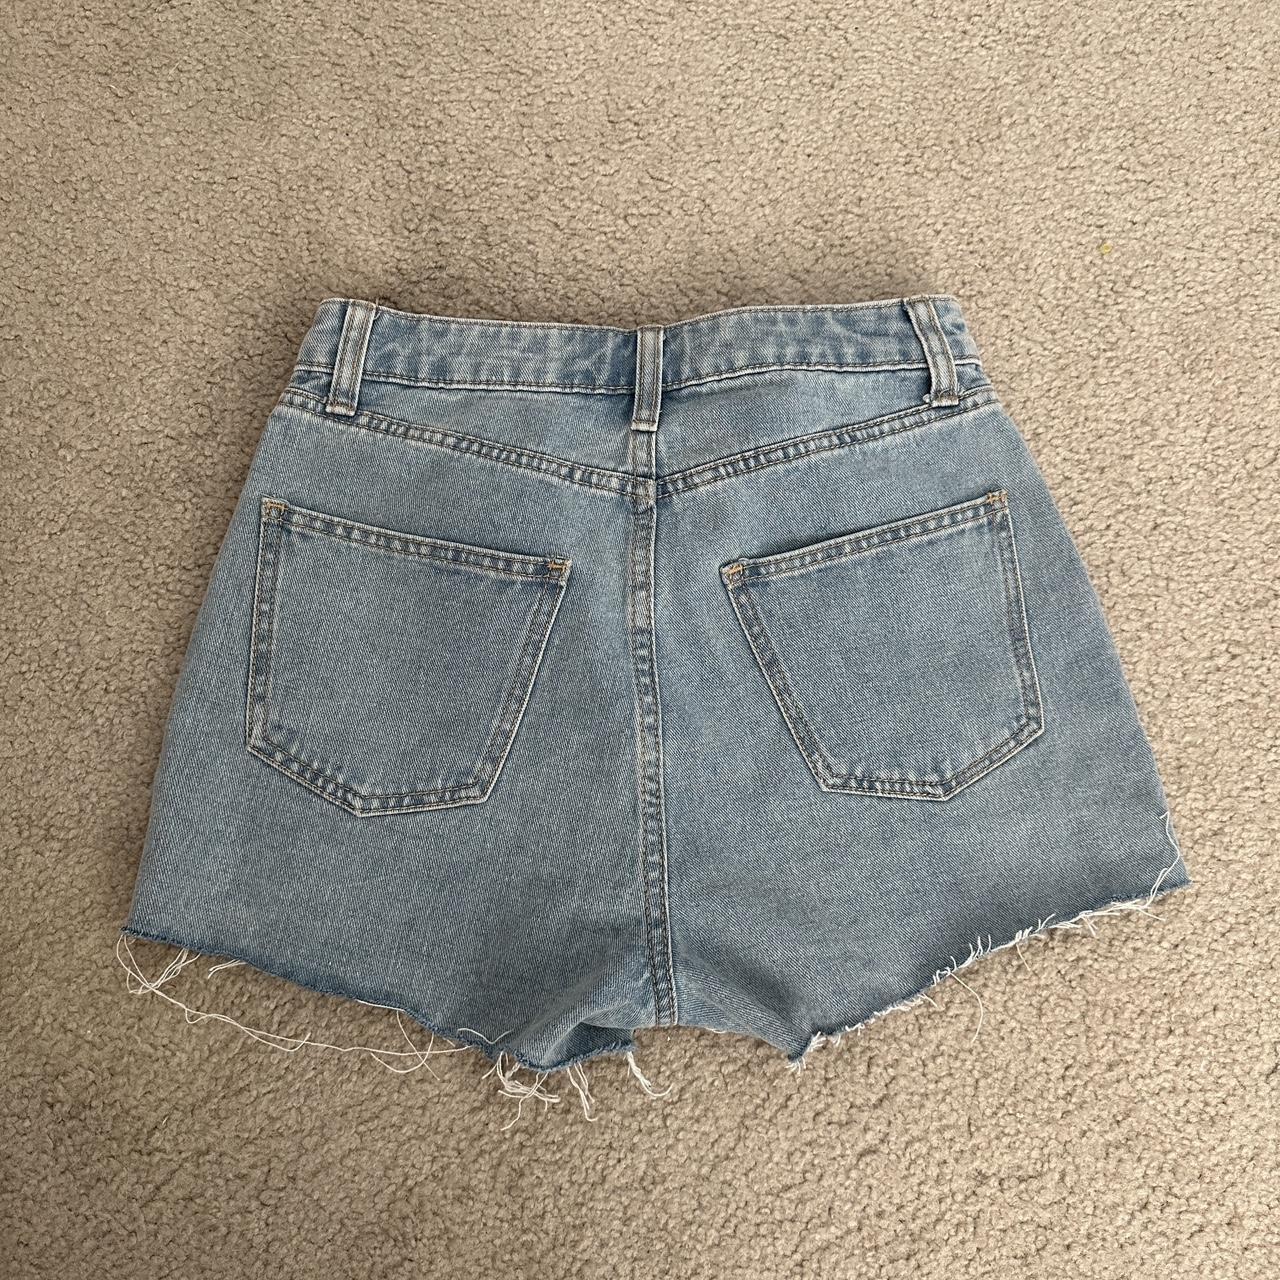 Wild Fable Two Tone Button Fly Jean Shorts Worn... - Depop